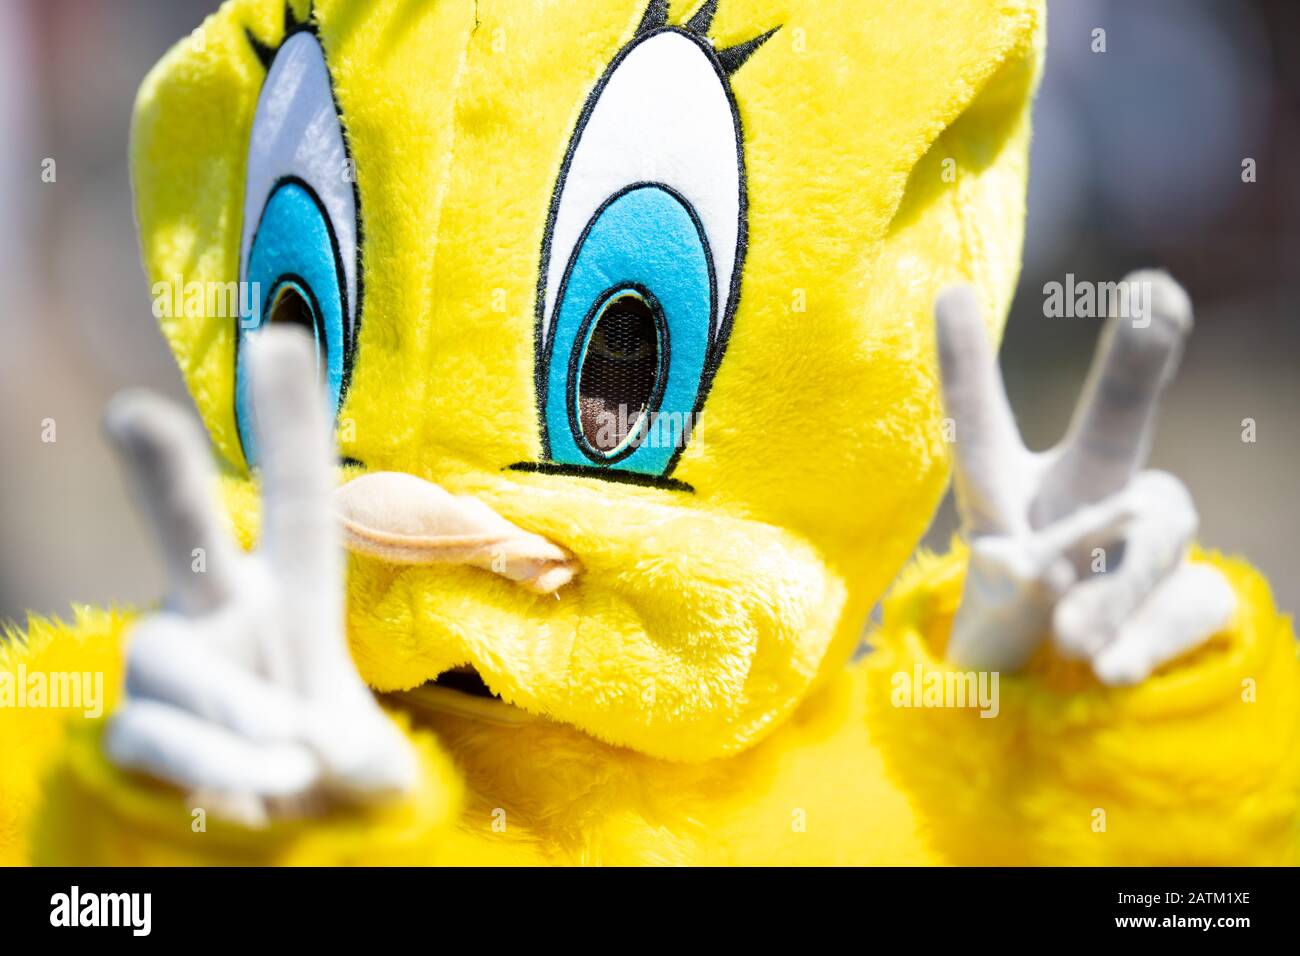 Chicago, Illinois, USA - August 8, 2019: The Bud Billiken Parade, Man dress up as Tweety, giving peace signs during the parade Stock Photo